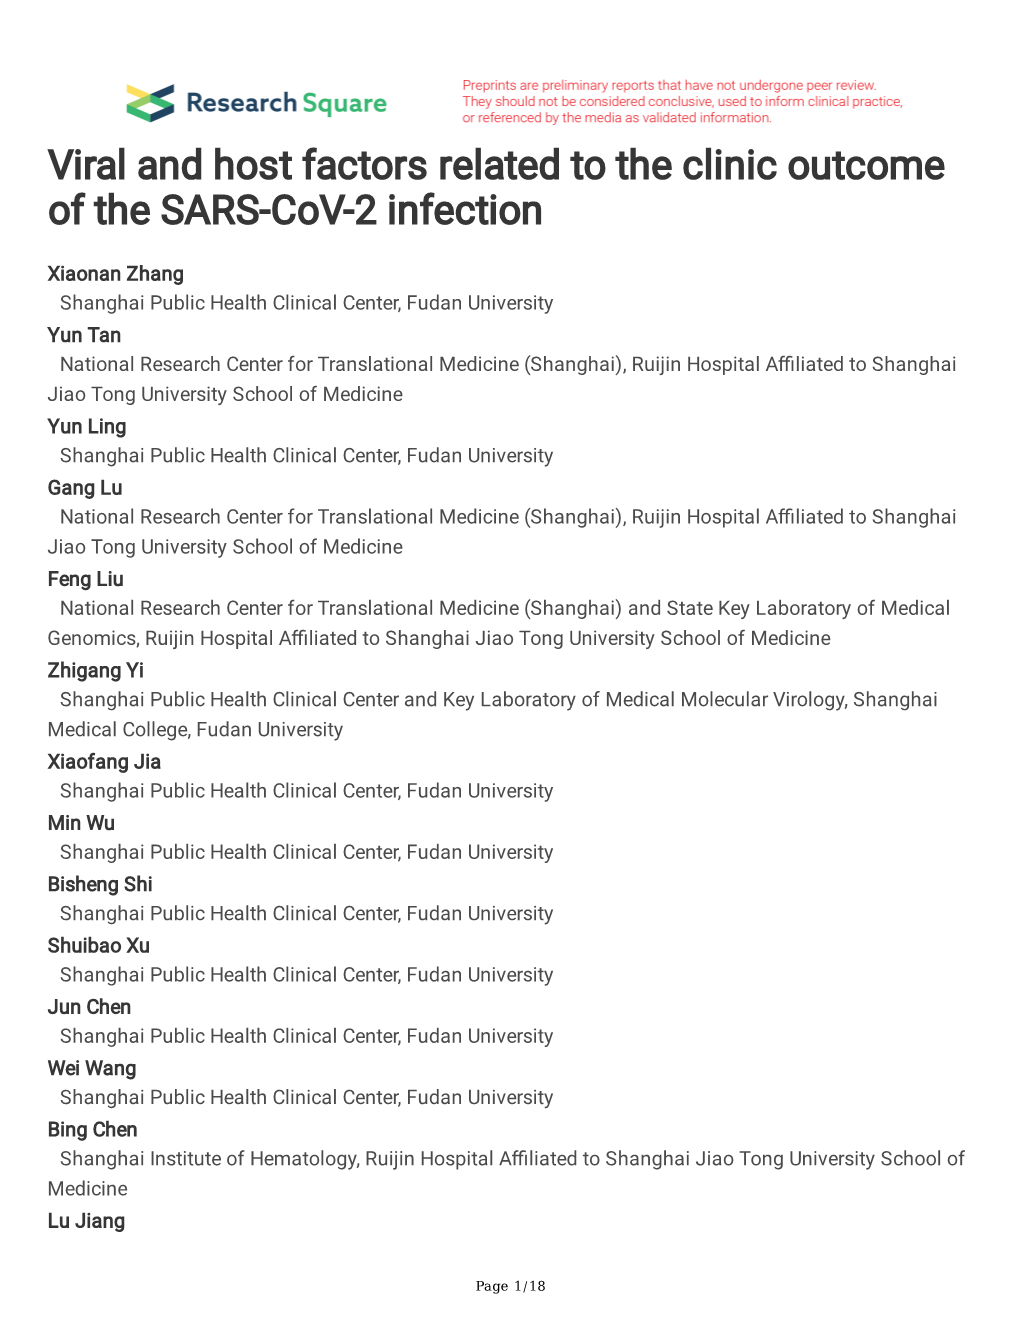 Viral and Host Factors Related to the Clinic Outcome of the SARS-Cov-2 Infection